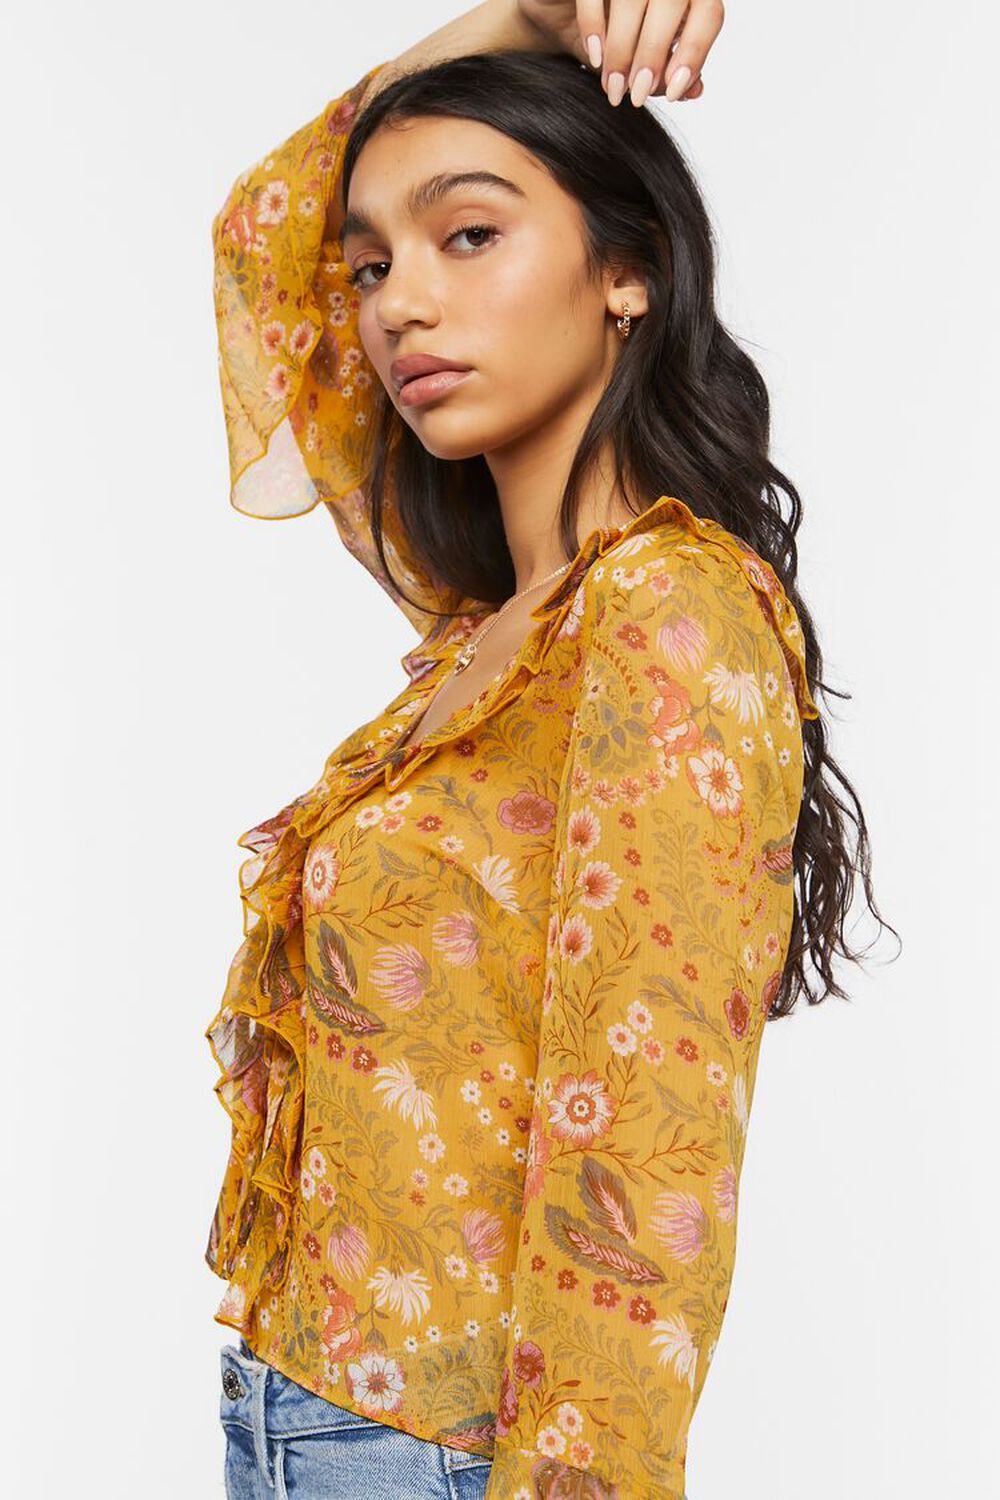 GOLD/MULTI Floral Print Ruffled Flounce Top, image 2